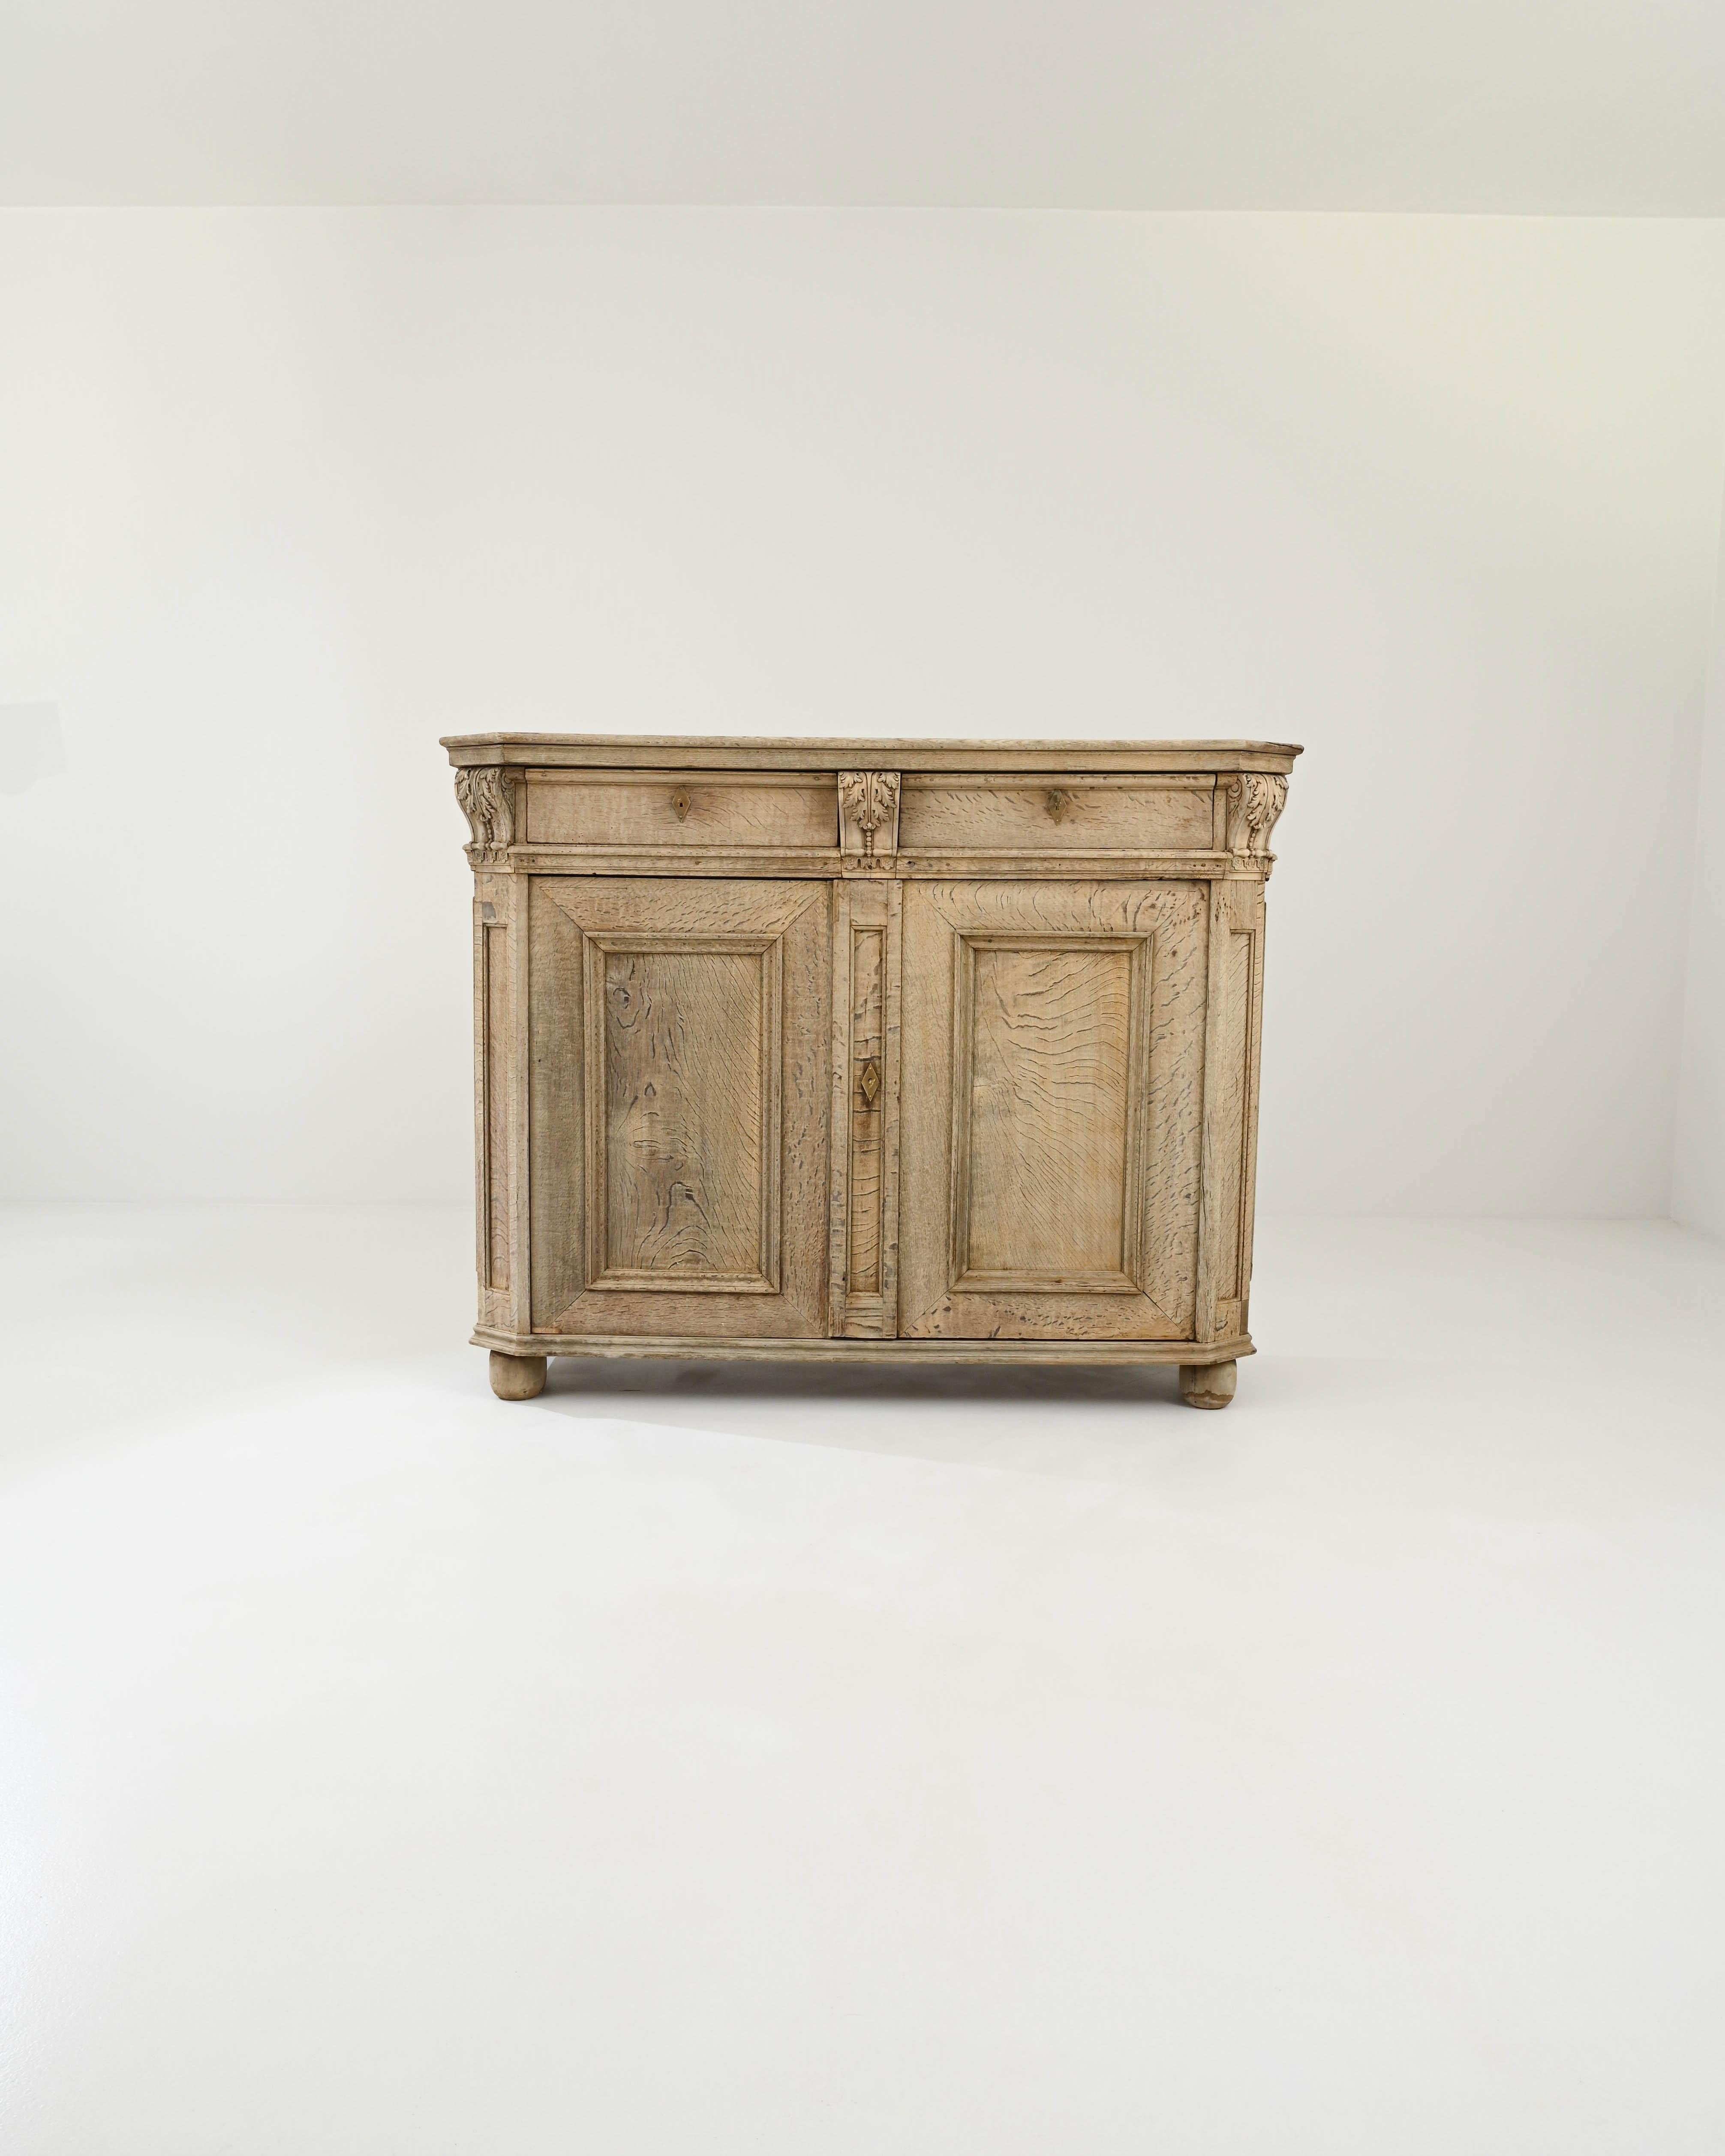 Beautiful craftsmanship and statuesque proportions give this oak buffet an air of antique grandeur. Hand-built in France in the 1800s, a brindled grain dances in dark patterns over the pale golden surface of the wood, bringing a sense of fluidity to